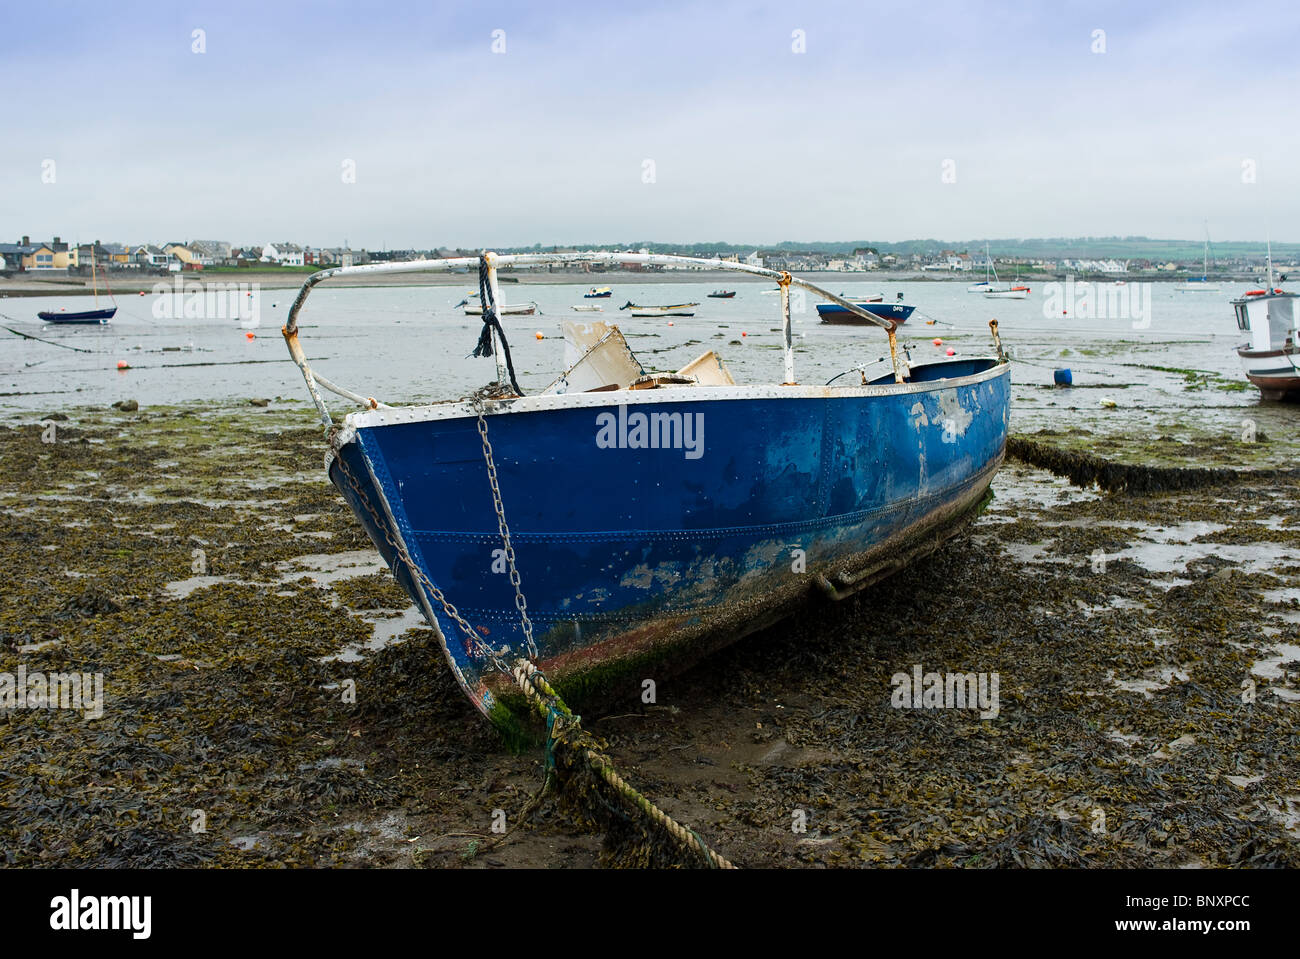 A wrecked yacht in the harbour of the seaside town of Skerries, north county Dublin, Ireland Stock Photo